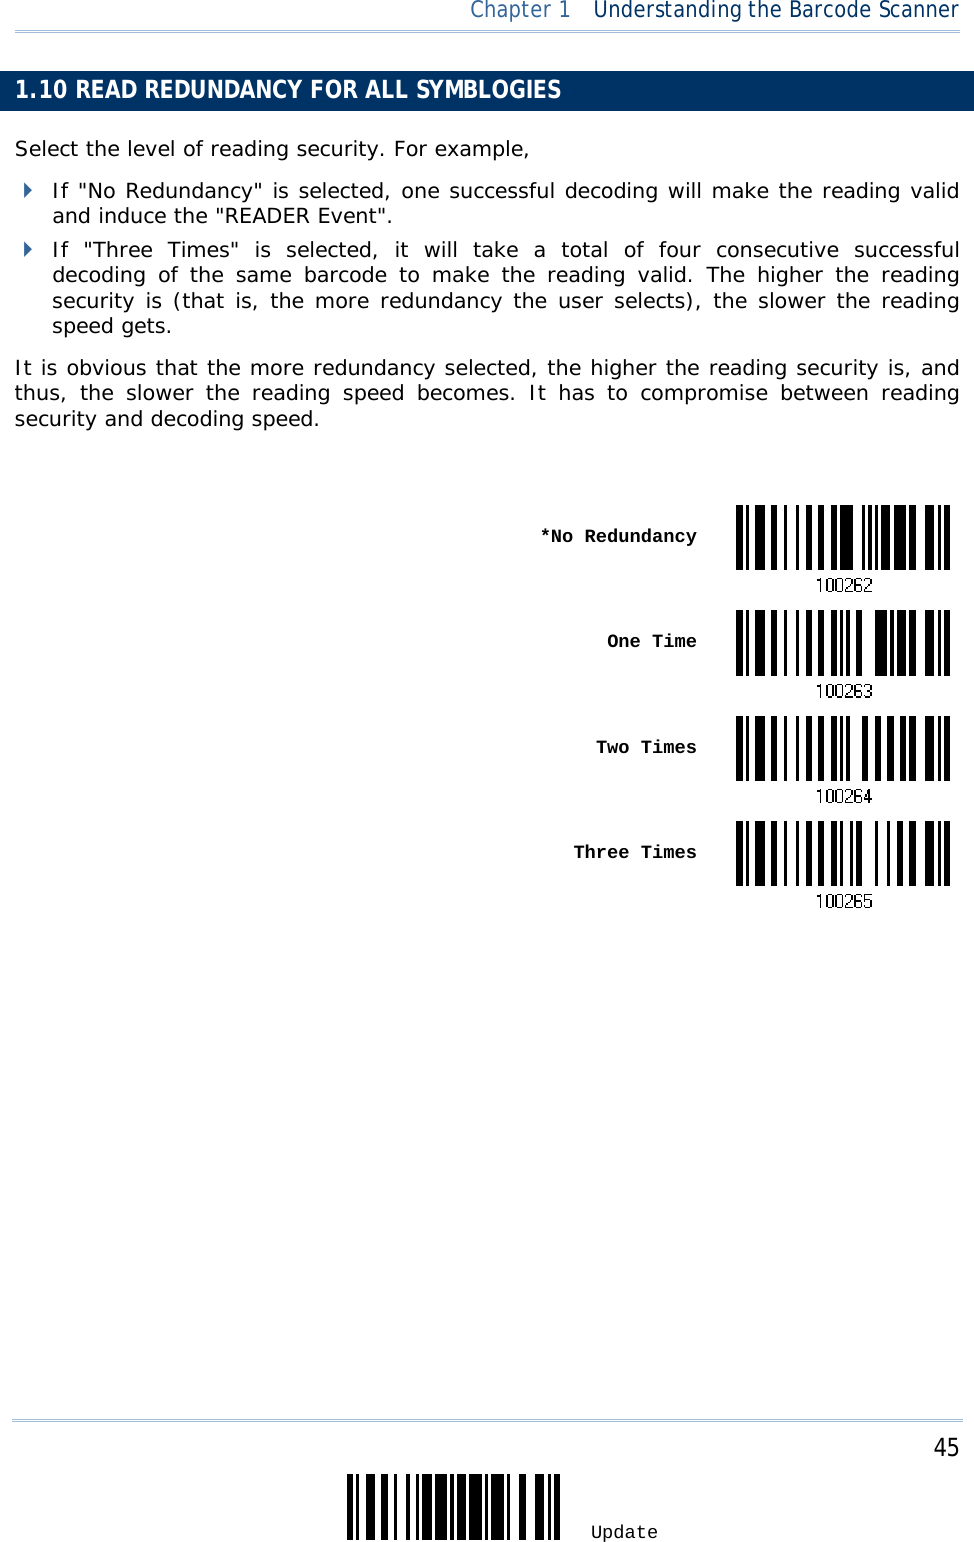     45 Update  Chapter 1  Understanding the Barcode Scanner 1.10 READ REDUNDANCY FOR ALL SYMBLOGIES Select the level of reading security. For example,  If &quot;No Redundancy&quot; is selected, one successful decoding will make the reading valid and induce the &quot;READER Event&quot;.  If &quot;Three Times&quot; is selected, it will take a total of four consecutive successful decoding of the same barcode to make the reading valid. The higher the reading security is (that is, the more redundancy the user selects), the slower the reading speed gets.  It is obvious that the more redundancy selected, the higher the reading security is, and thus, the slower the reading speed becomes. It has to compromise between reading security and decoding speed.   *No Redundancy One Time Two Times  Three Times                      